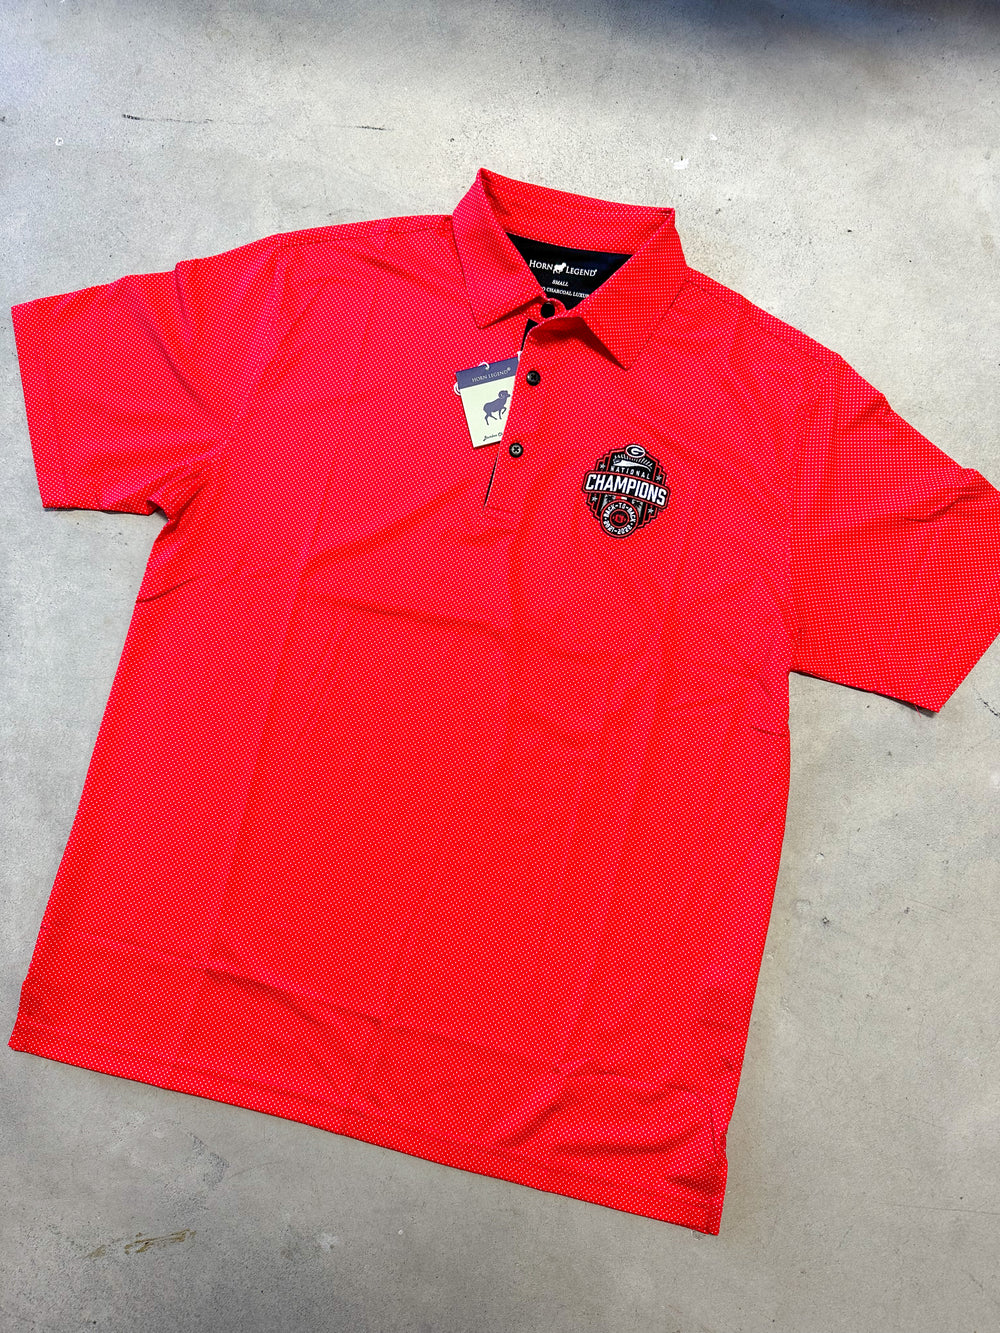 Horn Legend | YOUTH Gameday Polo - Champions Dot